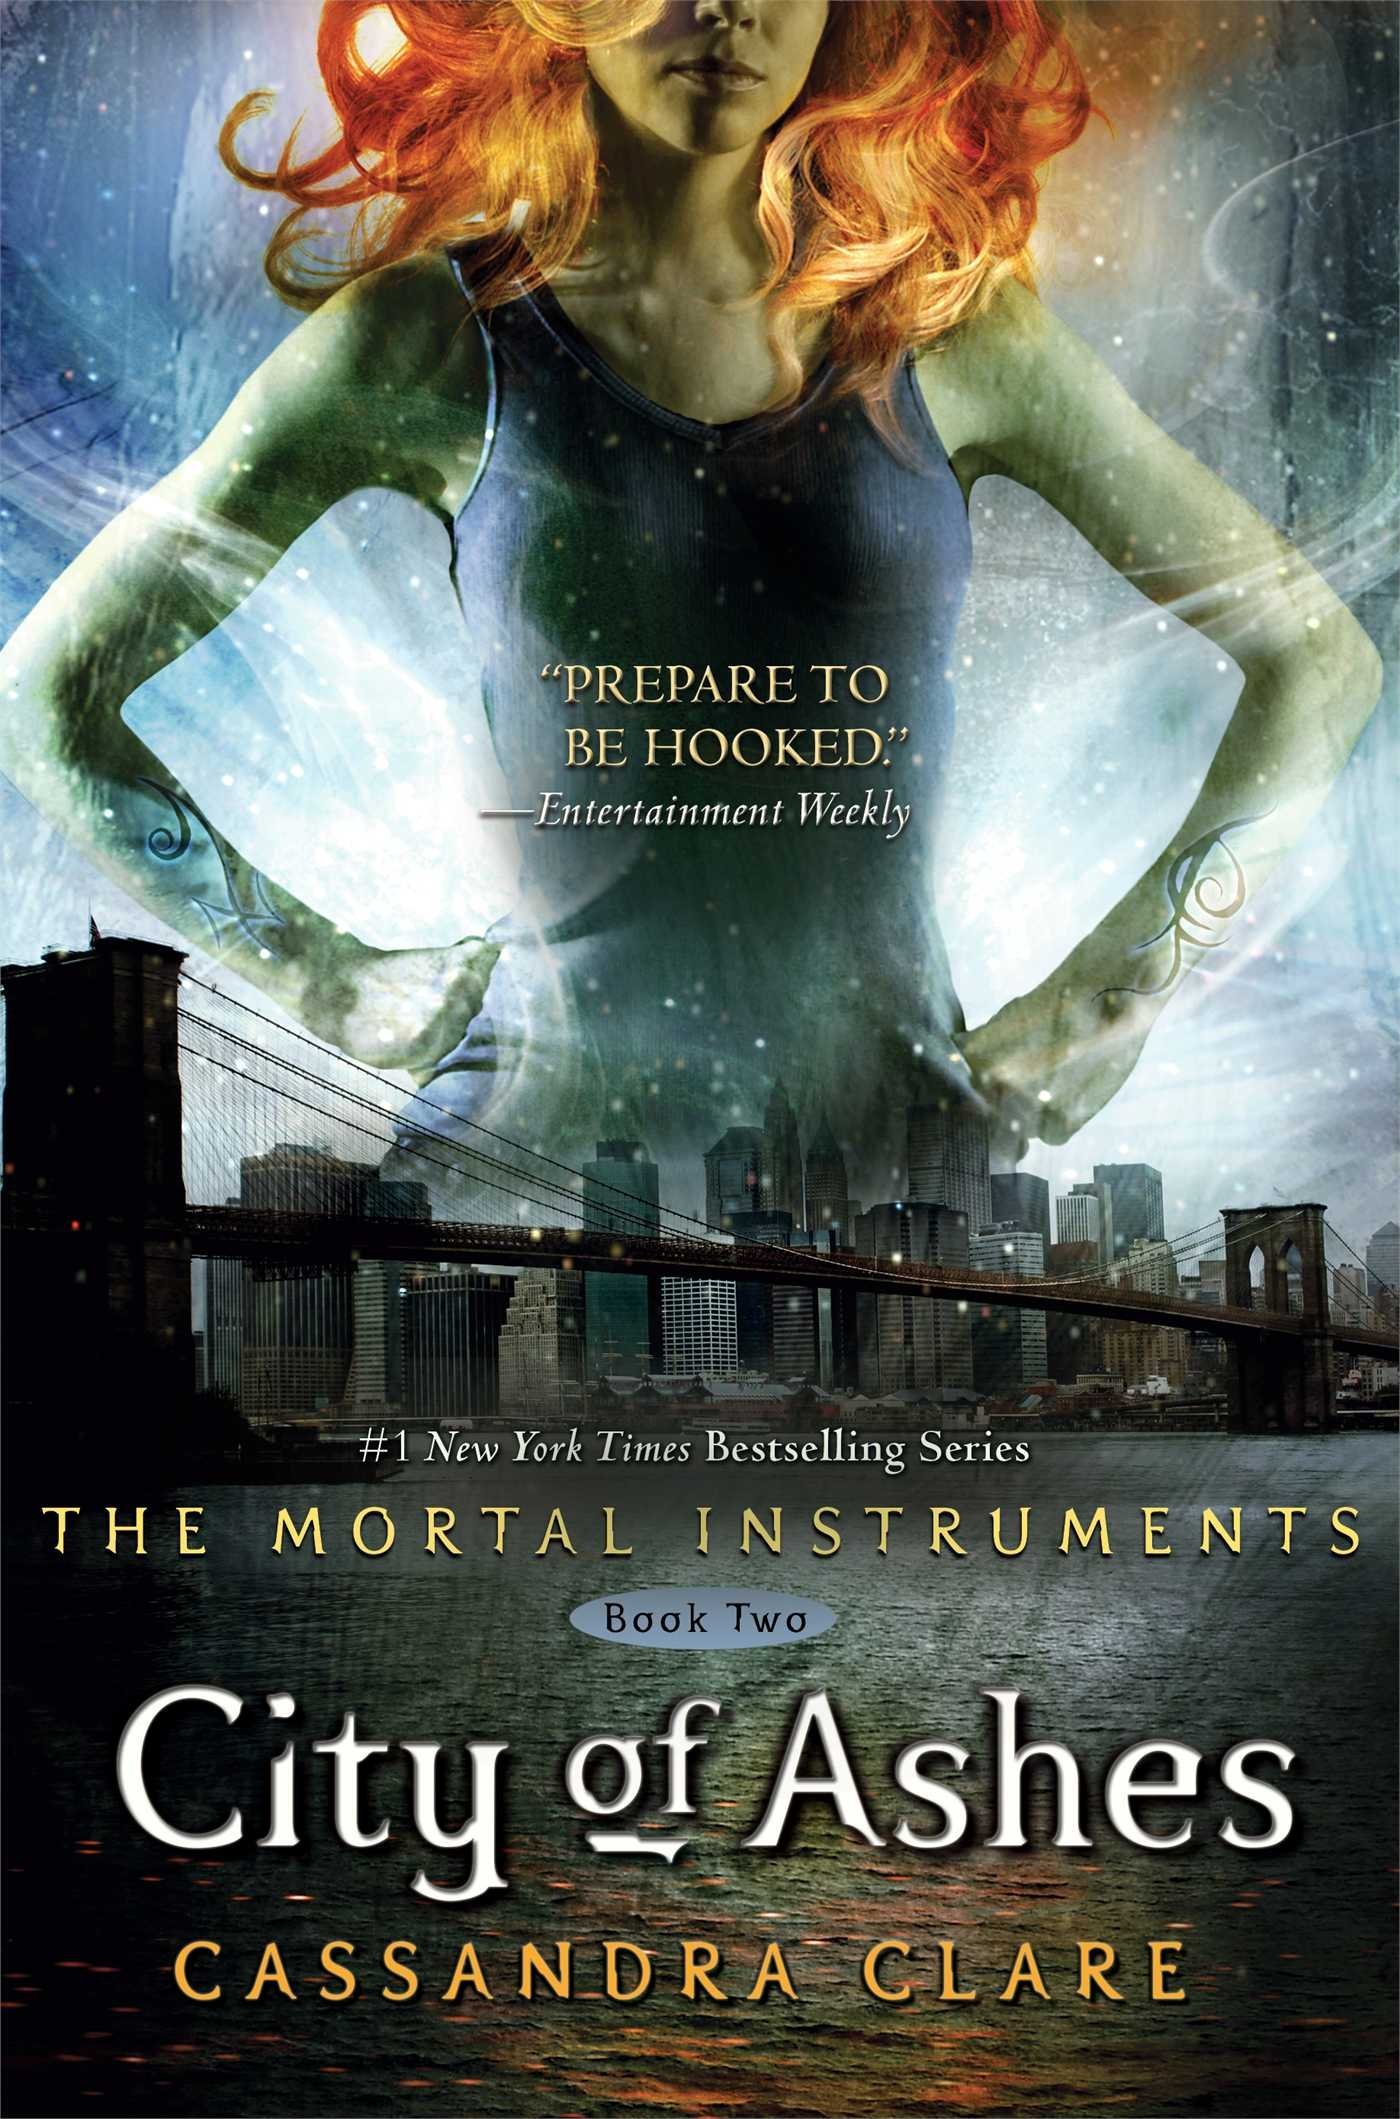 [EPUB] The Mortal Instruments #2 City of Ashes by Cassandra Clare